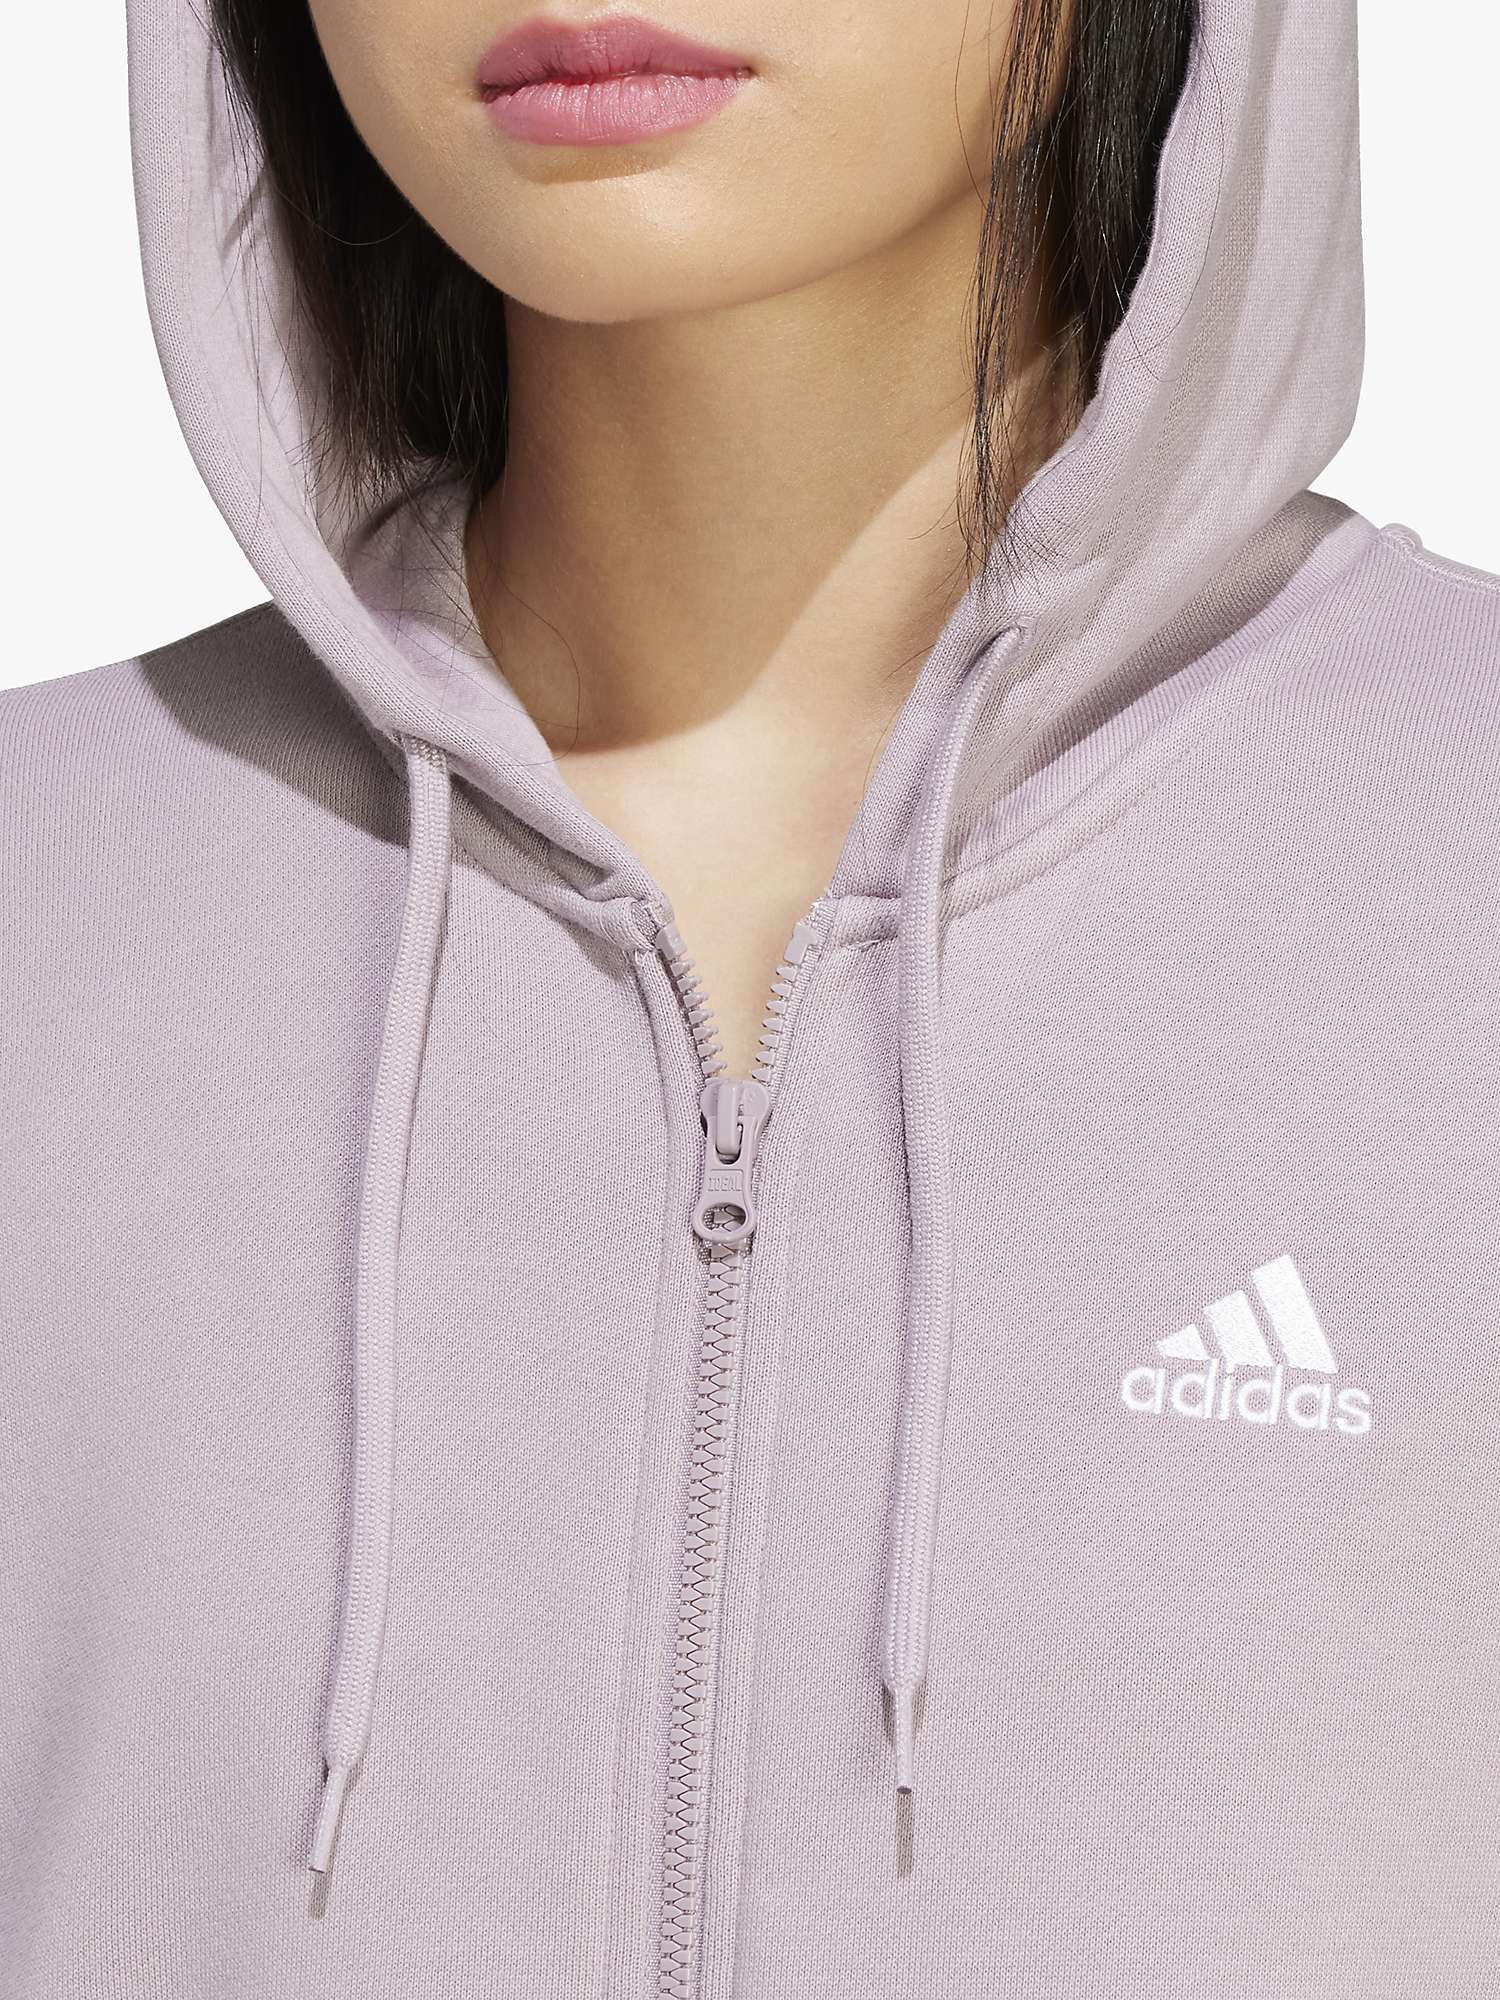 Buy adidas Essentials Linear Full-Zip French Terry Hoodie Online at johnlewis.com